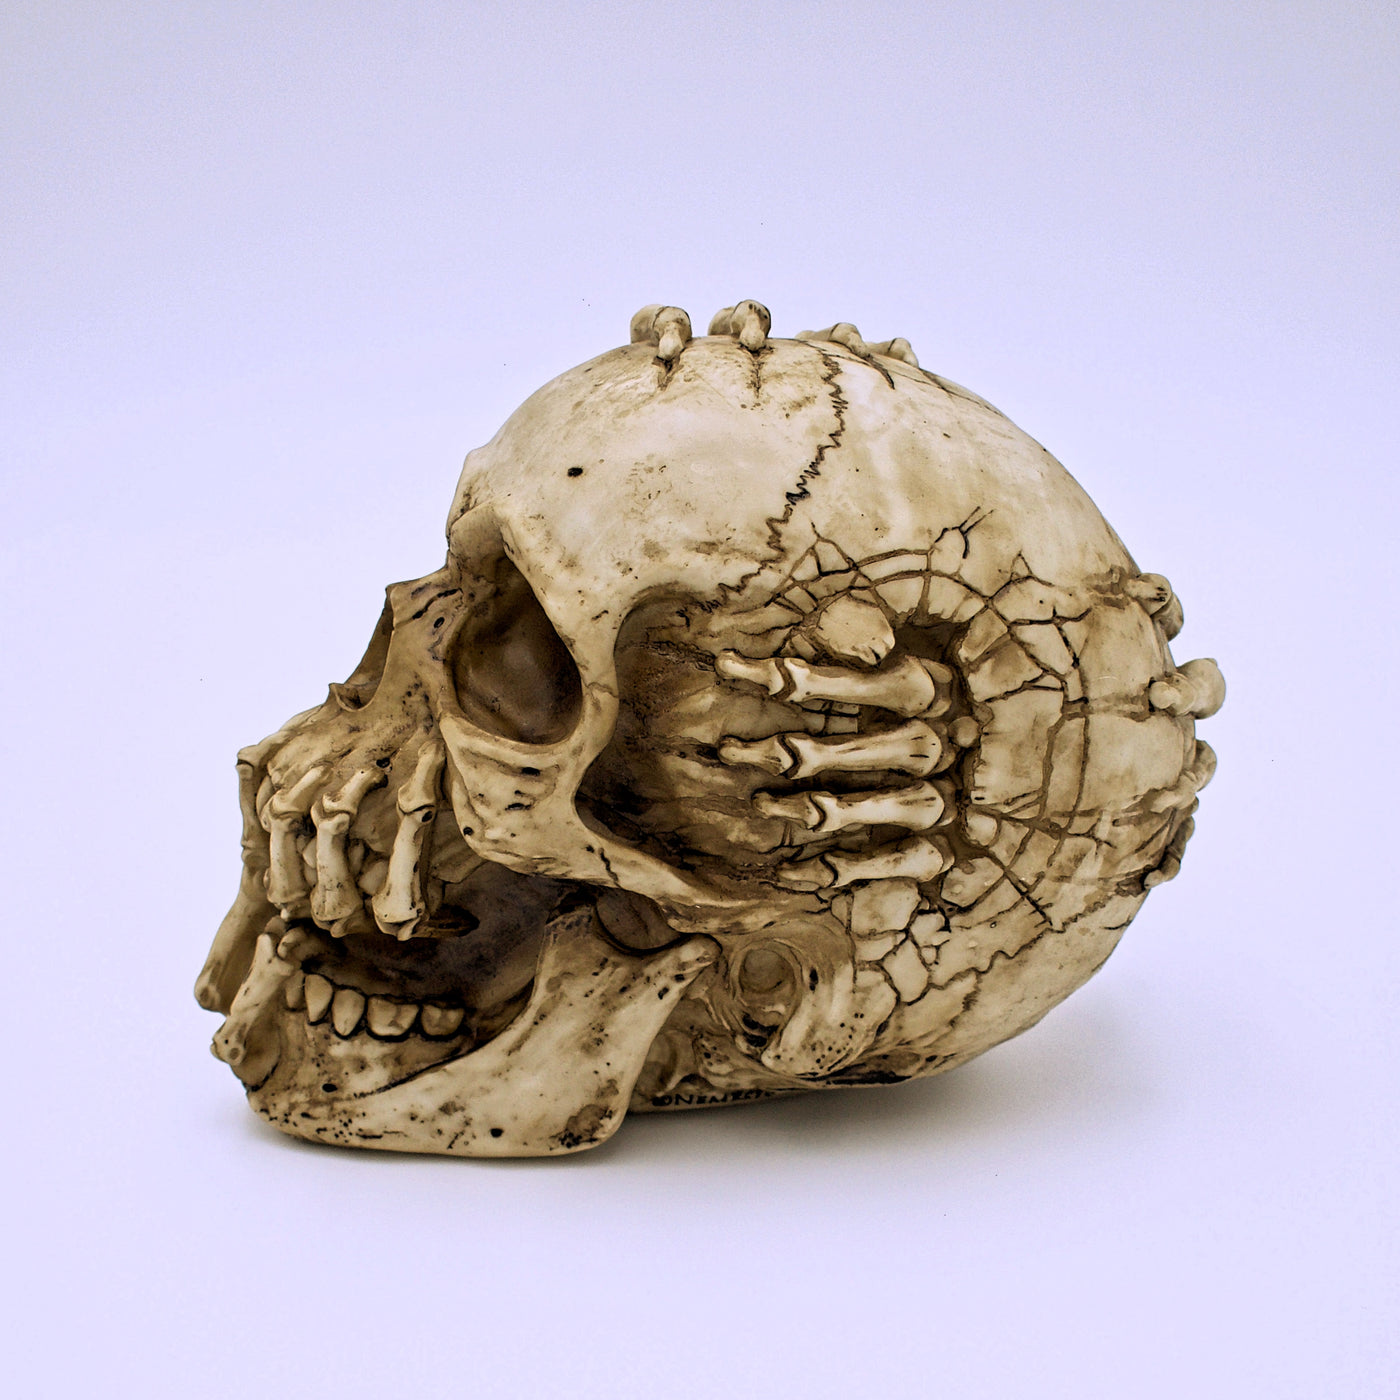 James Ryman's Breaking Out Design Skull Sculpture - The Cranio Collections